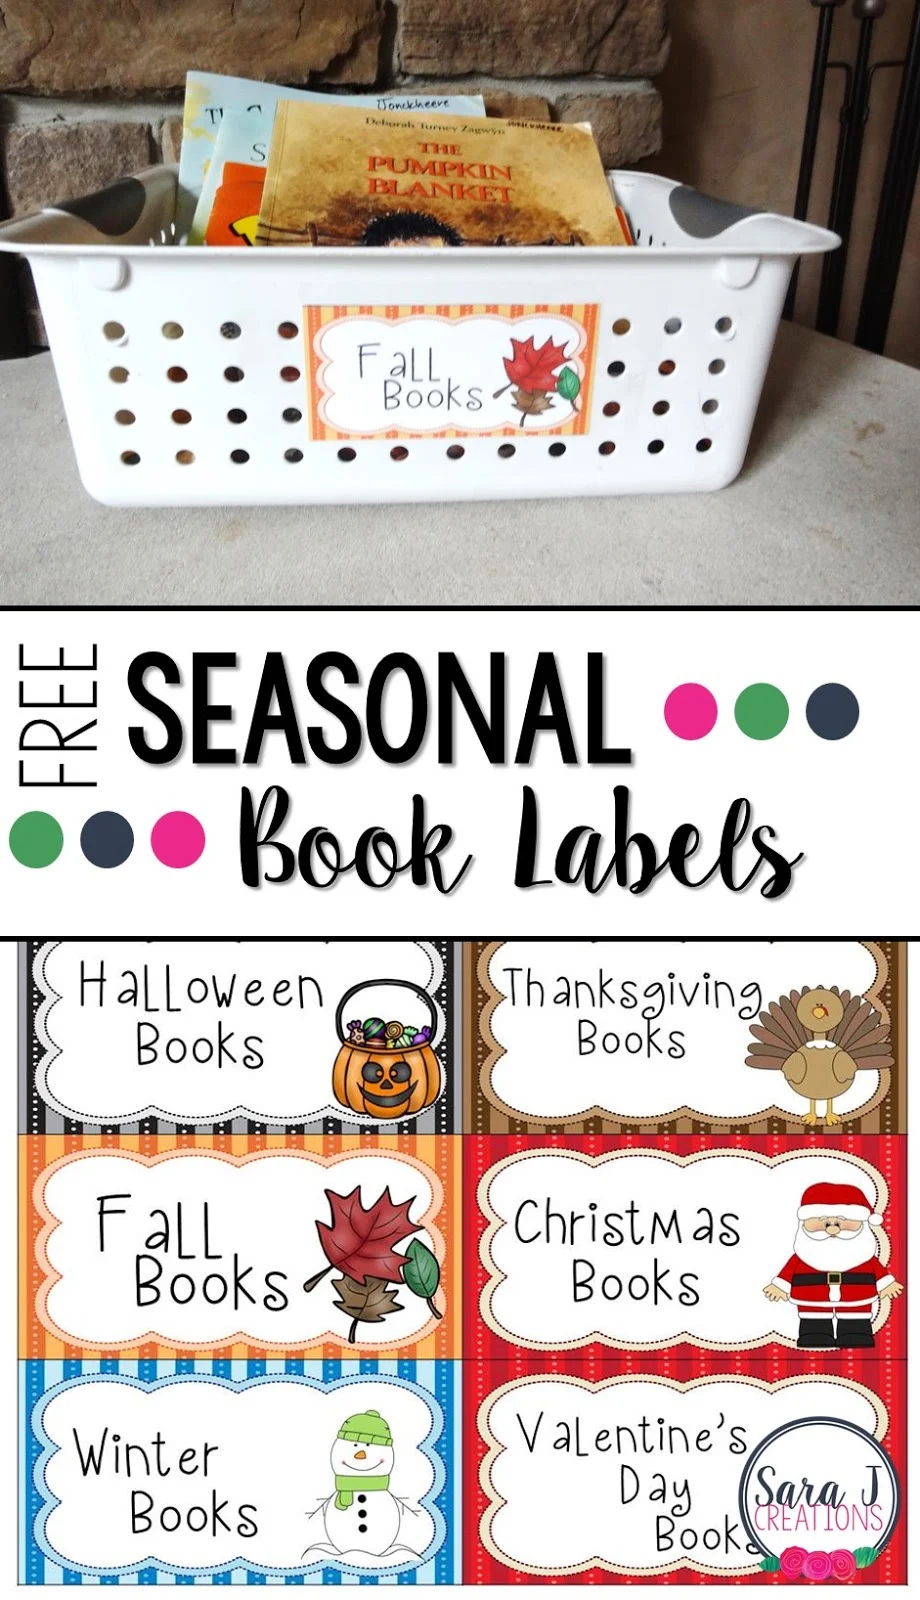 Free printable book labels!  Perfect for the classroom or home to change out books for each season and holiday.